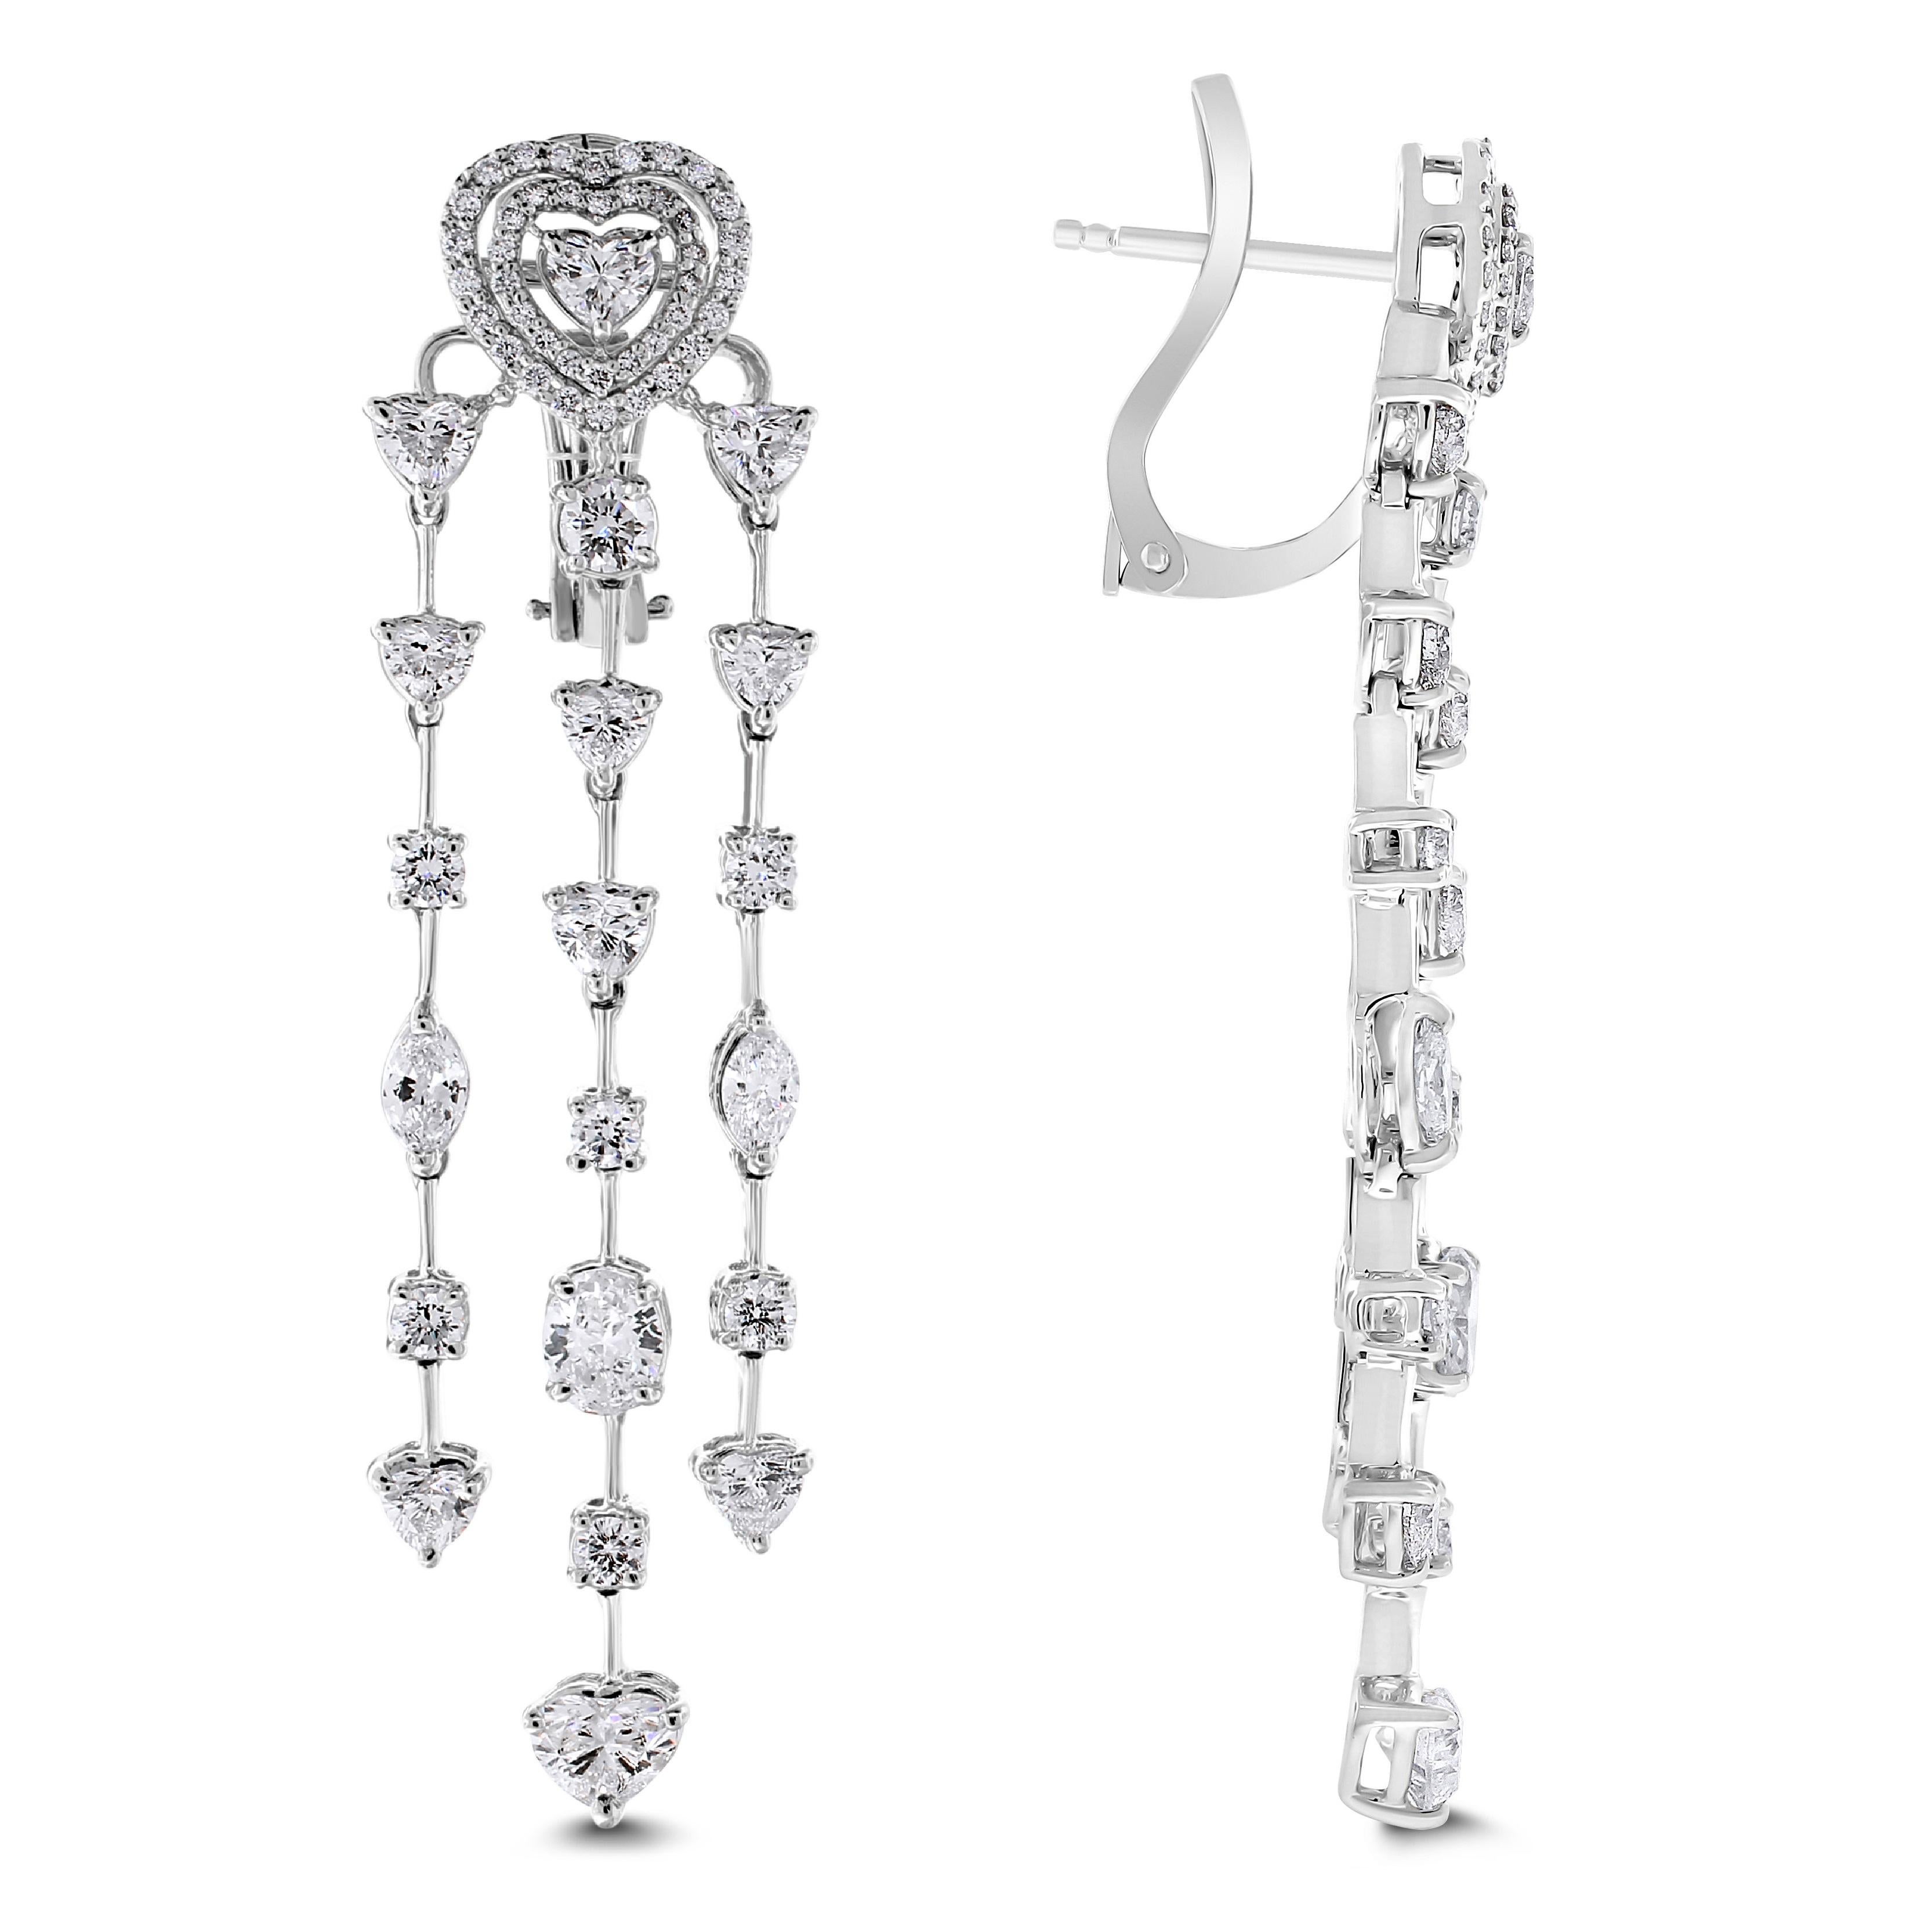 Delicate, Sweet & Sensual, these earrings showcase multiple diamond shapes to mesmerize and impress the onlooker. 

Diamonds Shapes: Heart, Round, Marquise & Oval
Total Diamond Weight: 7.19 ct 
Diamond Color: G - I
Diamond Clarity: VS (Very Slightly